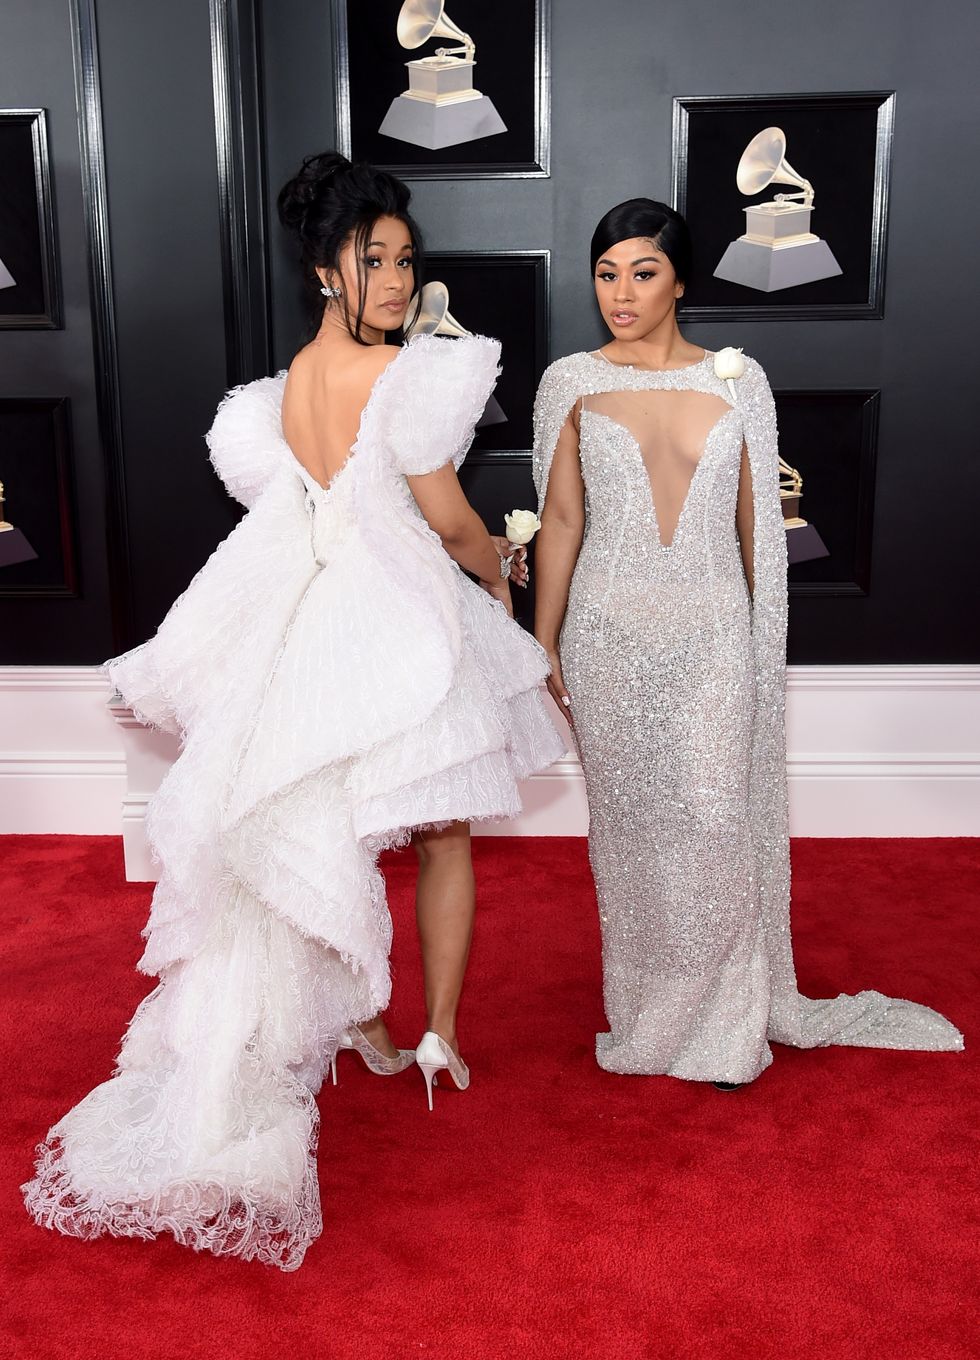 Who Is Cardi B's Sister? - All About Hennessy Carolina